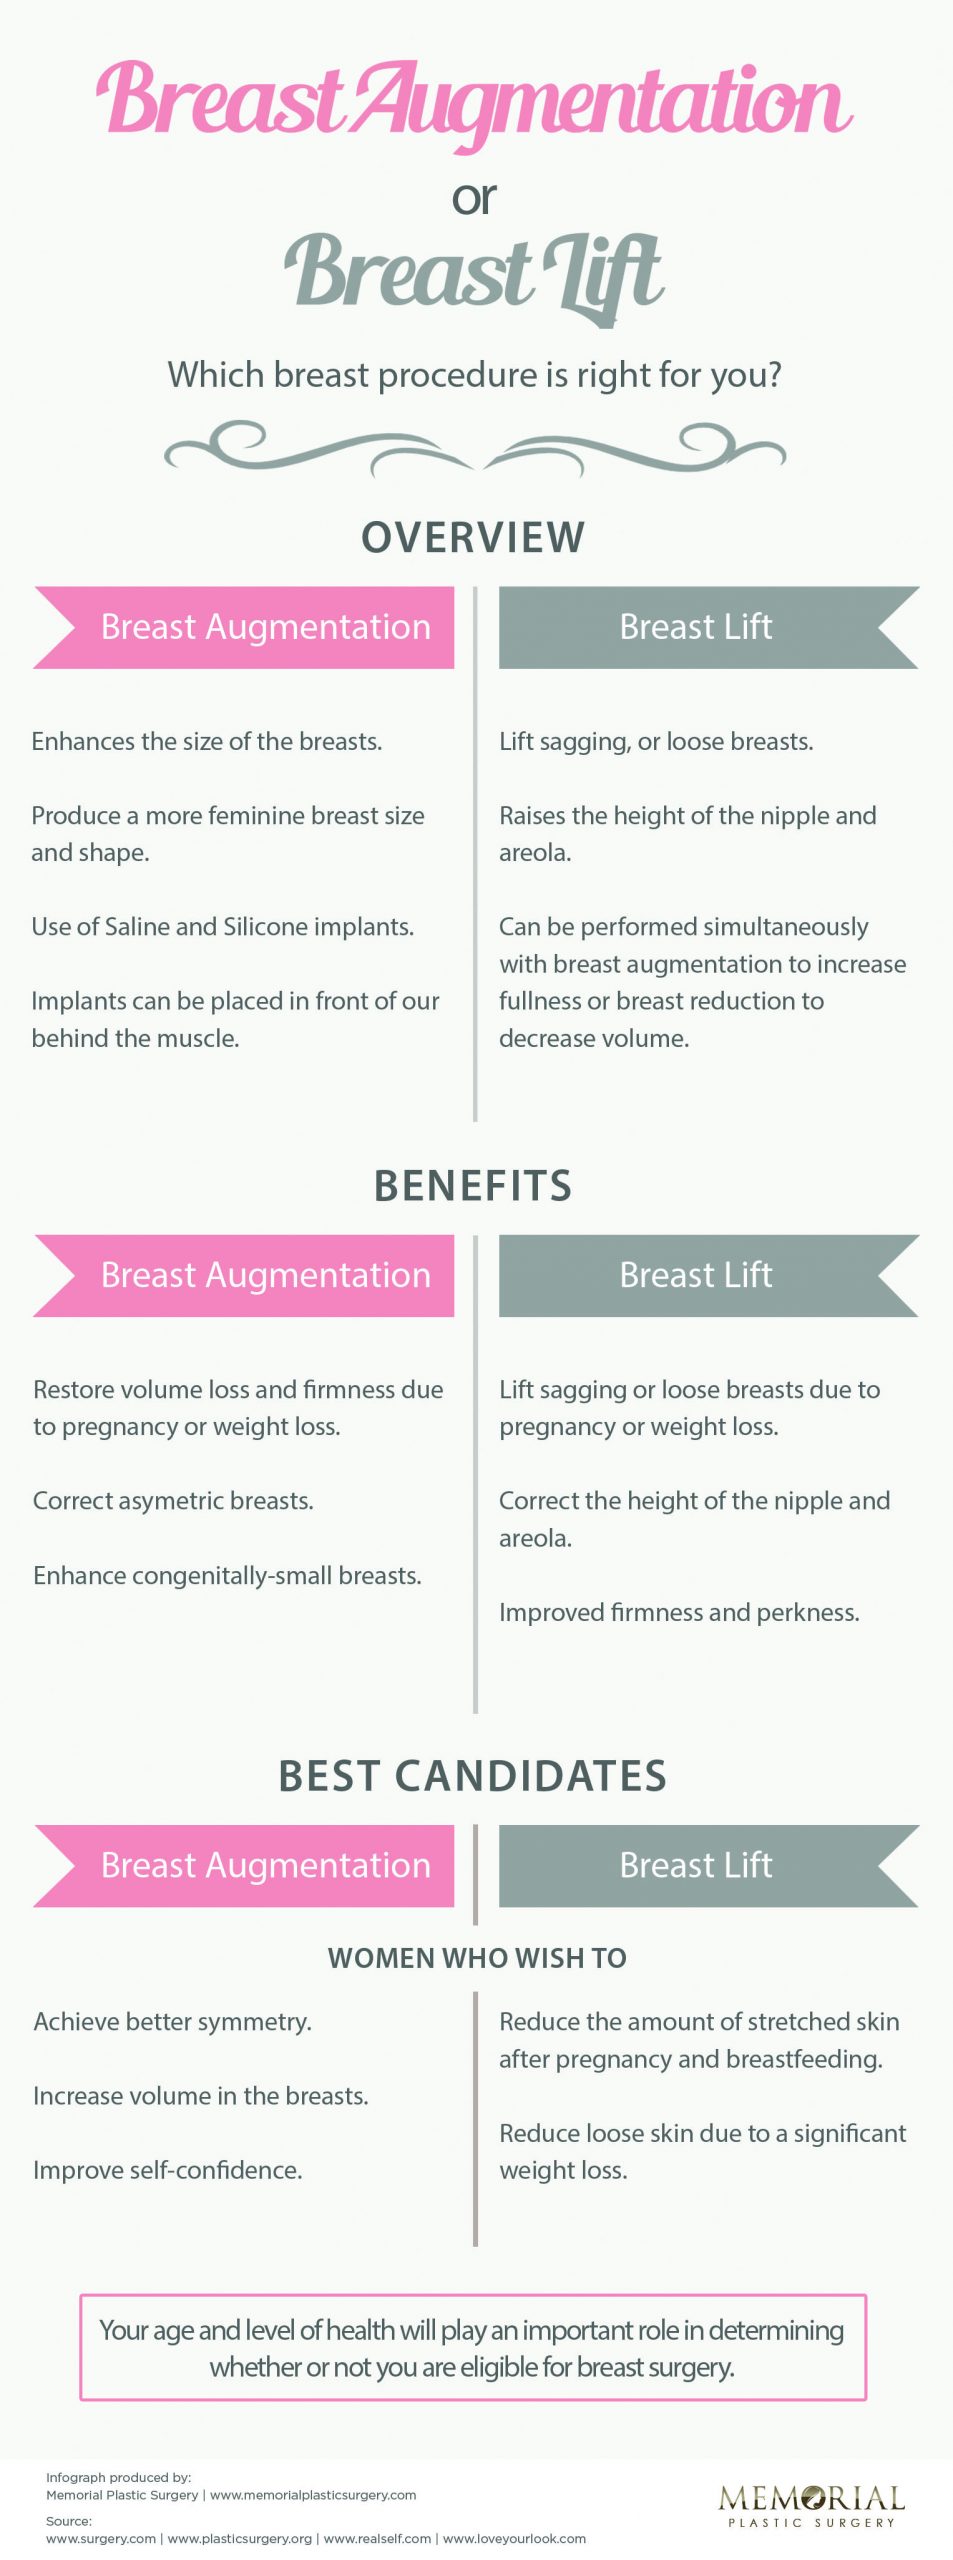 Should You Consider Breast Lift or Breast Augmentation?